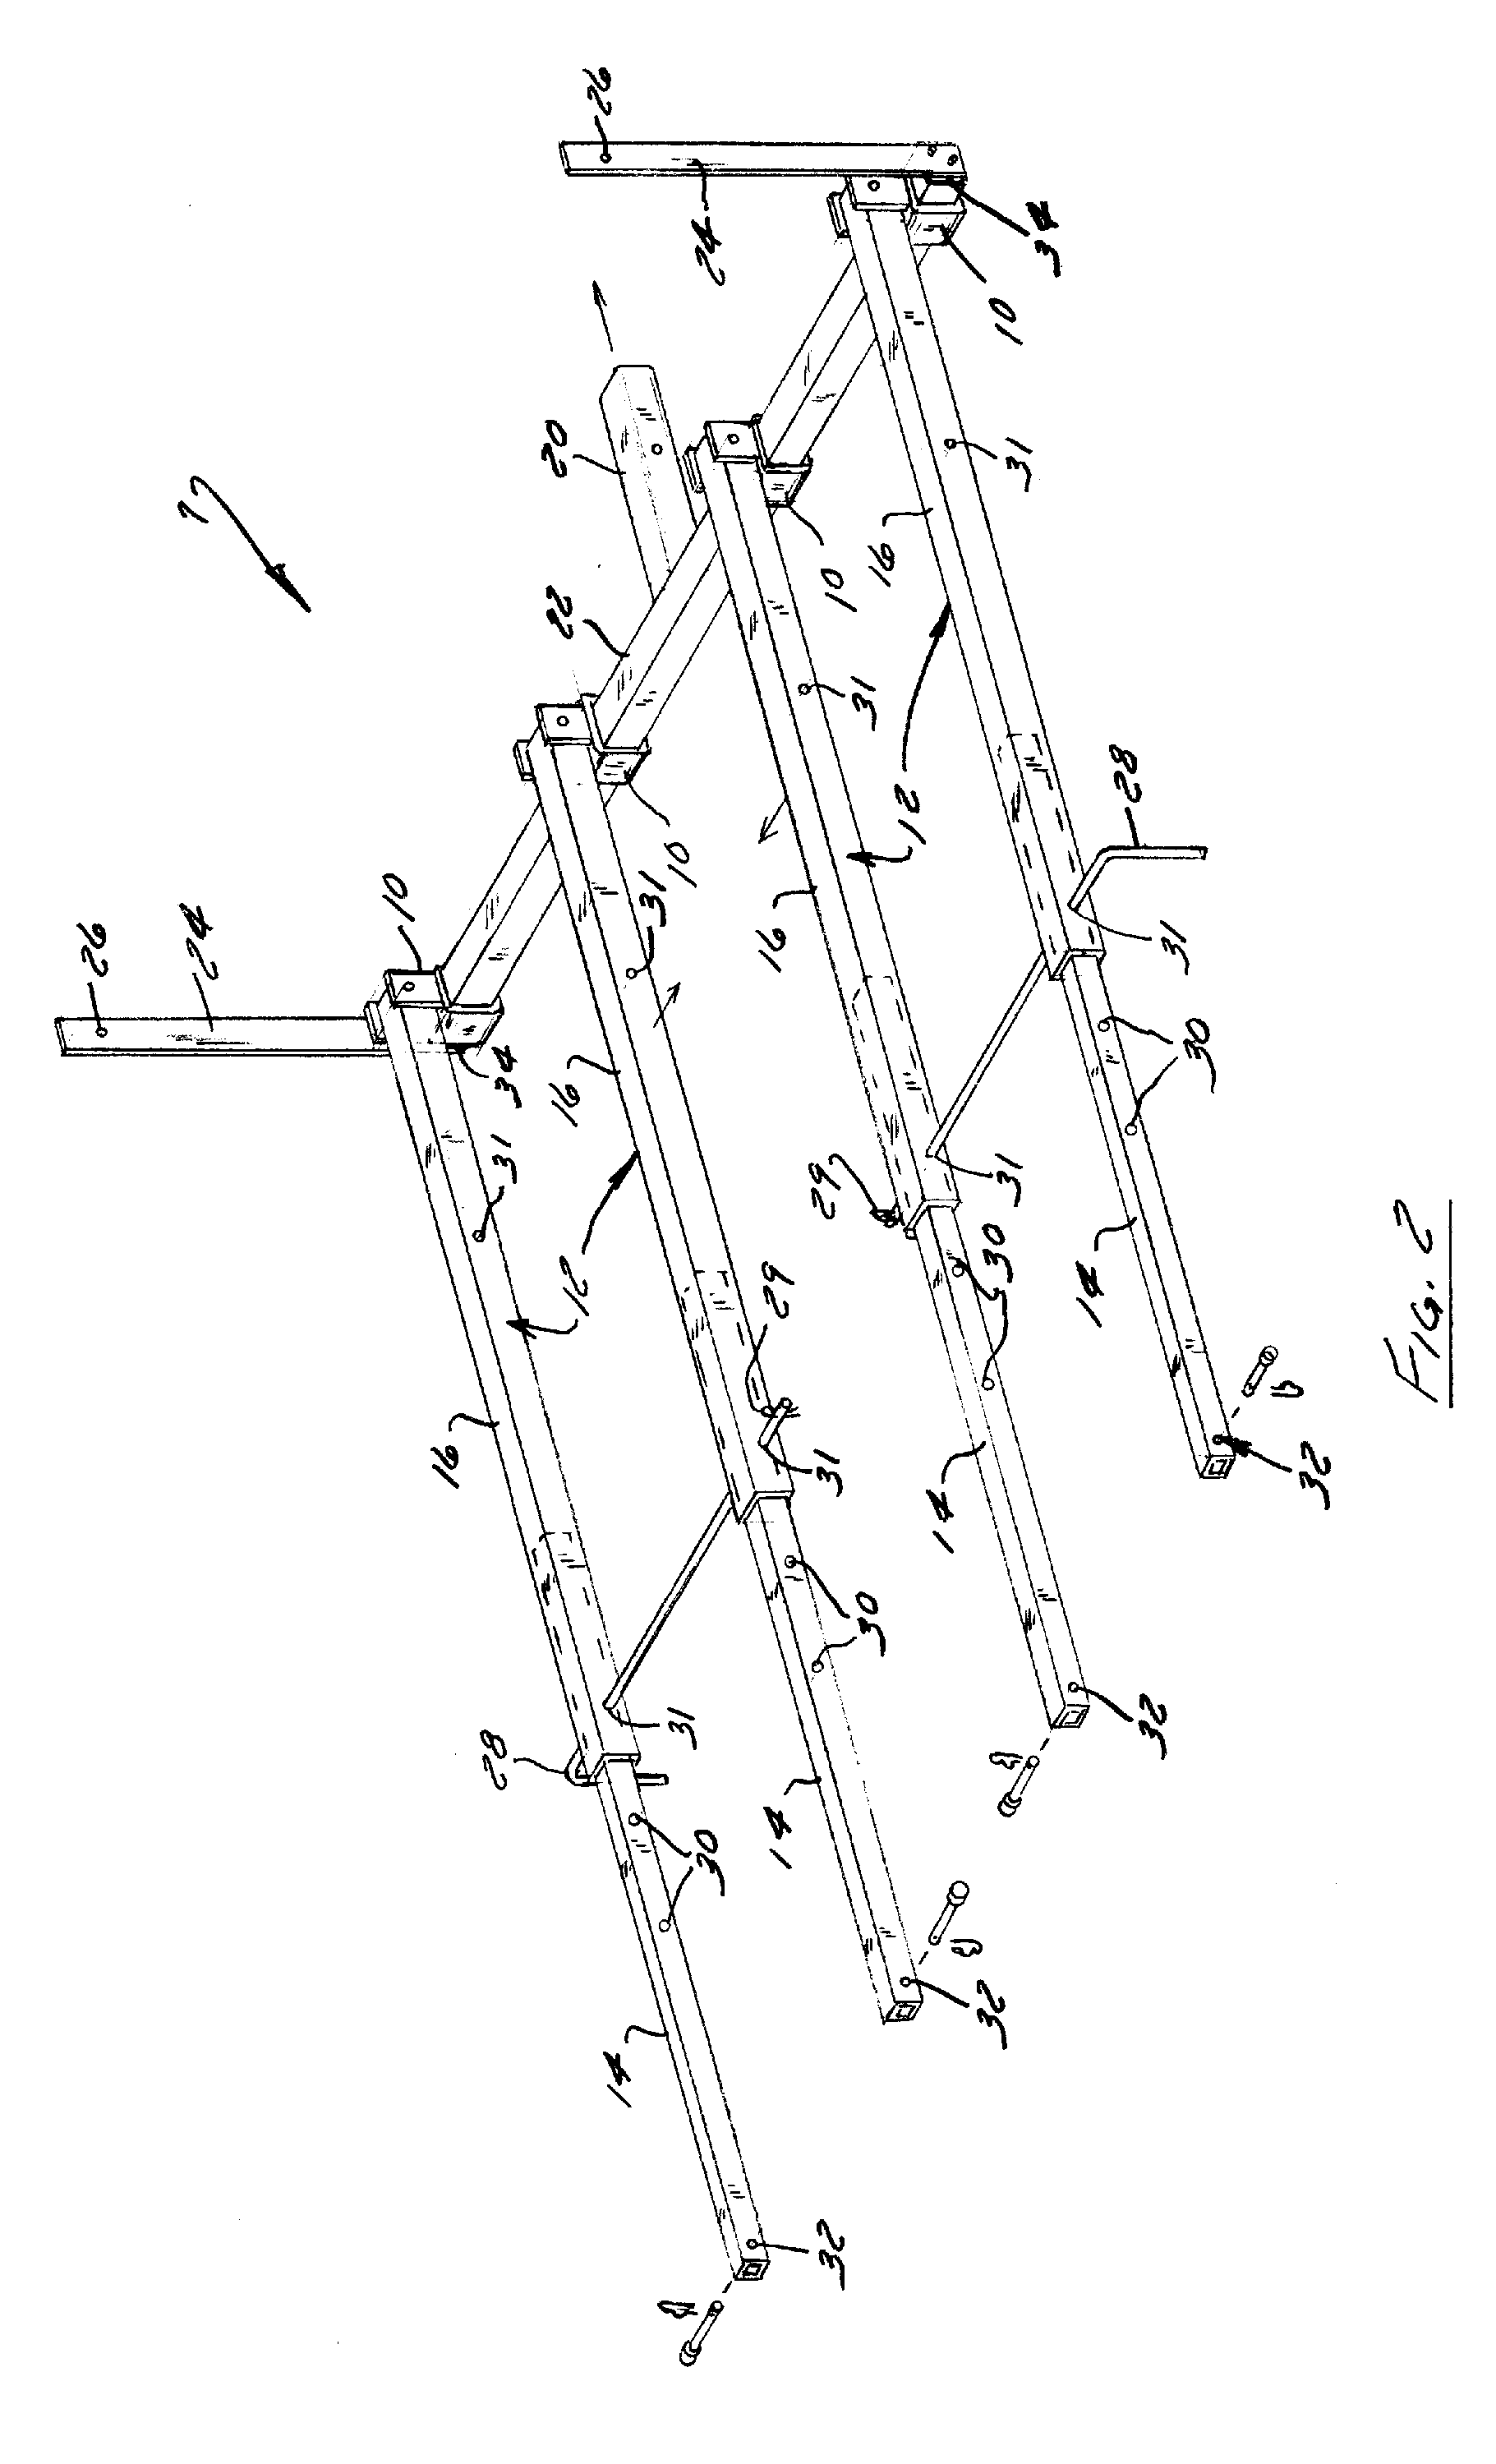 Apparatus and Method for Loading and Unloading Cargo